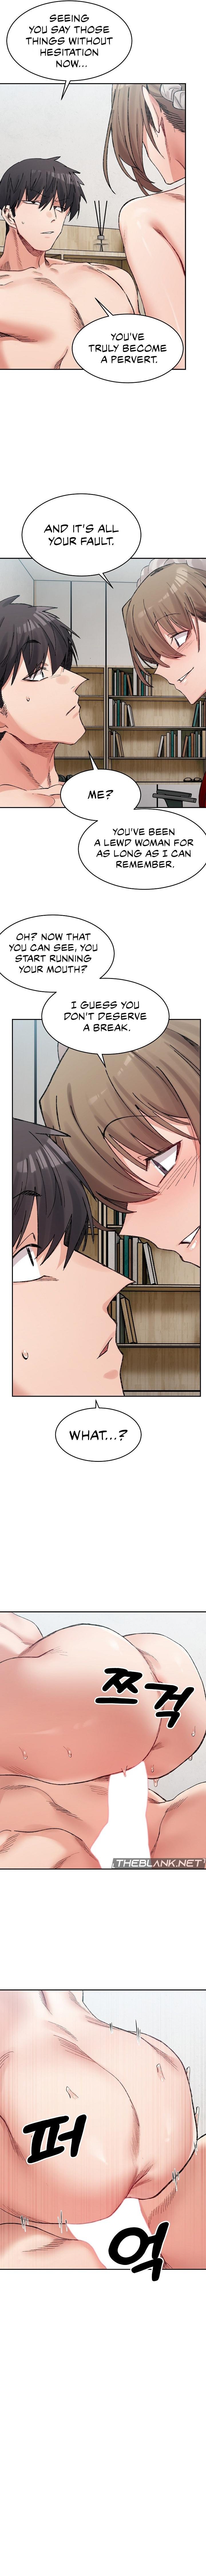 a-delicate-relationship-chap-31-2